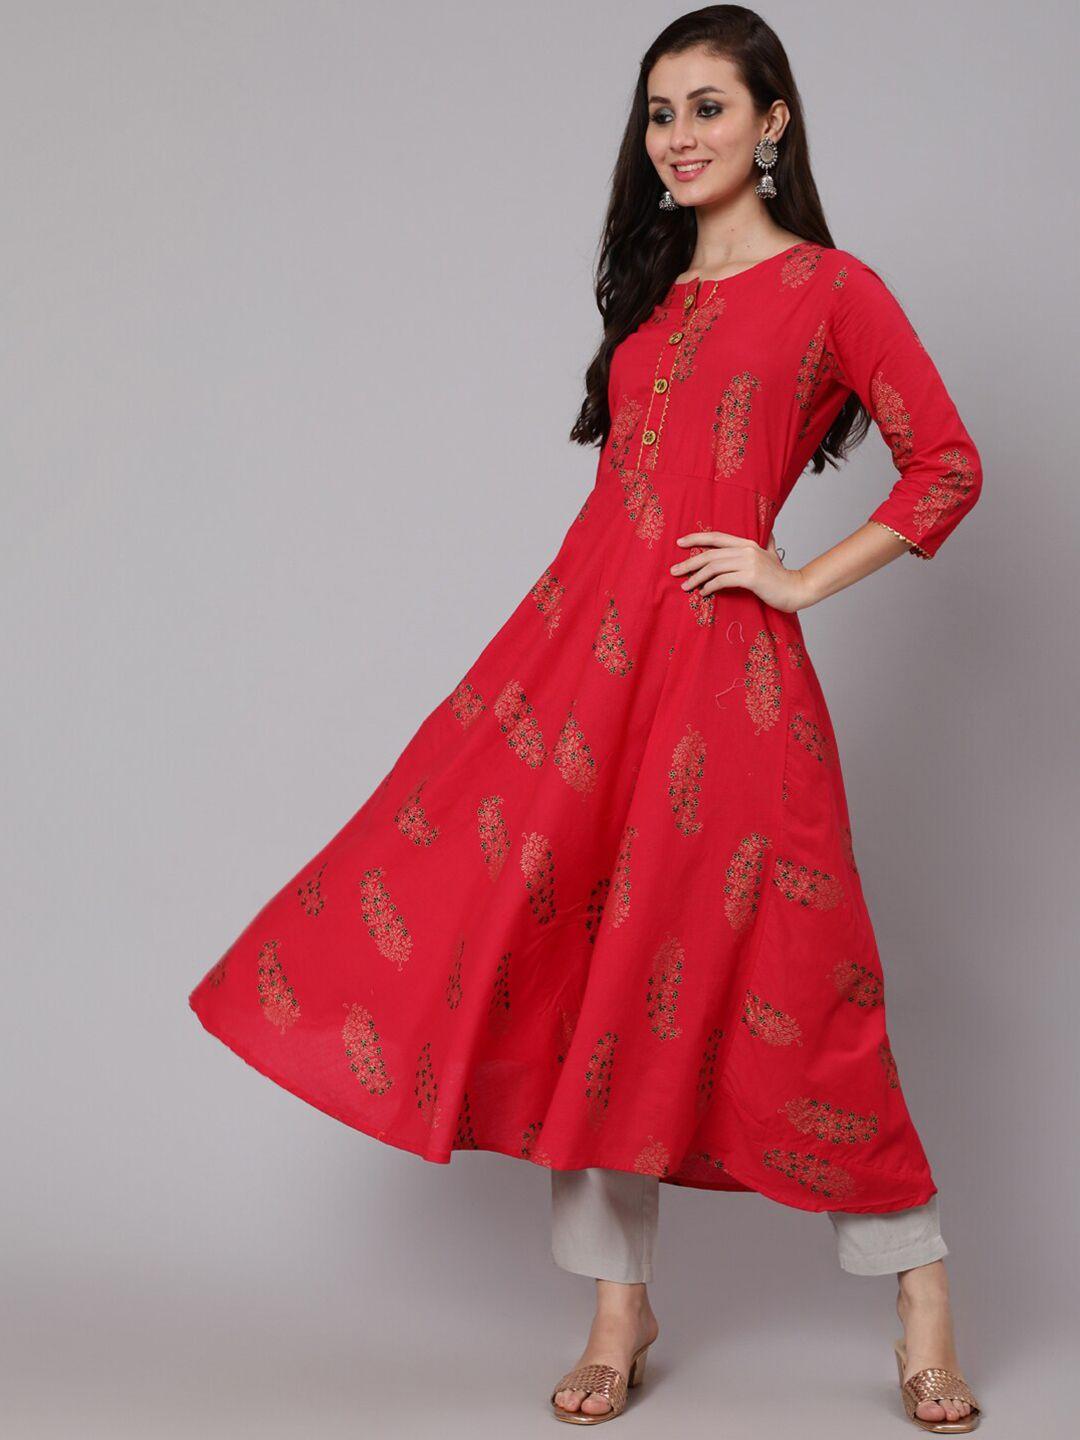 womenclick women red & gold-toned floral printed pure cotton a-line kurta